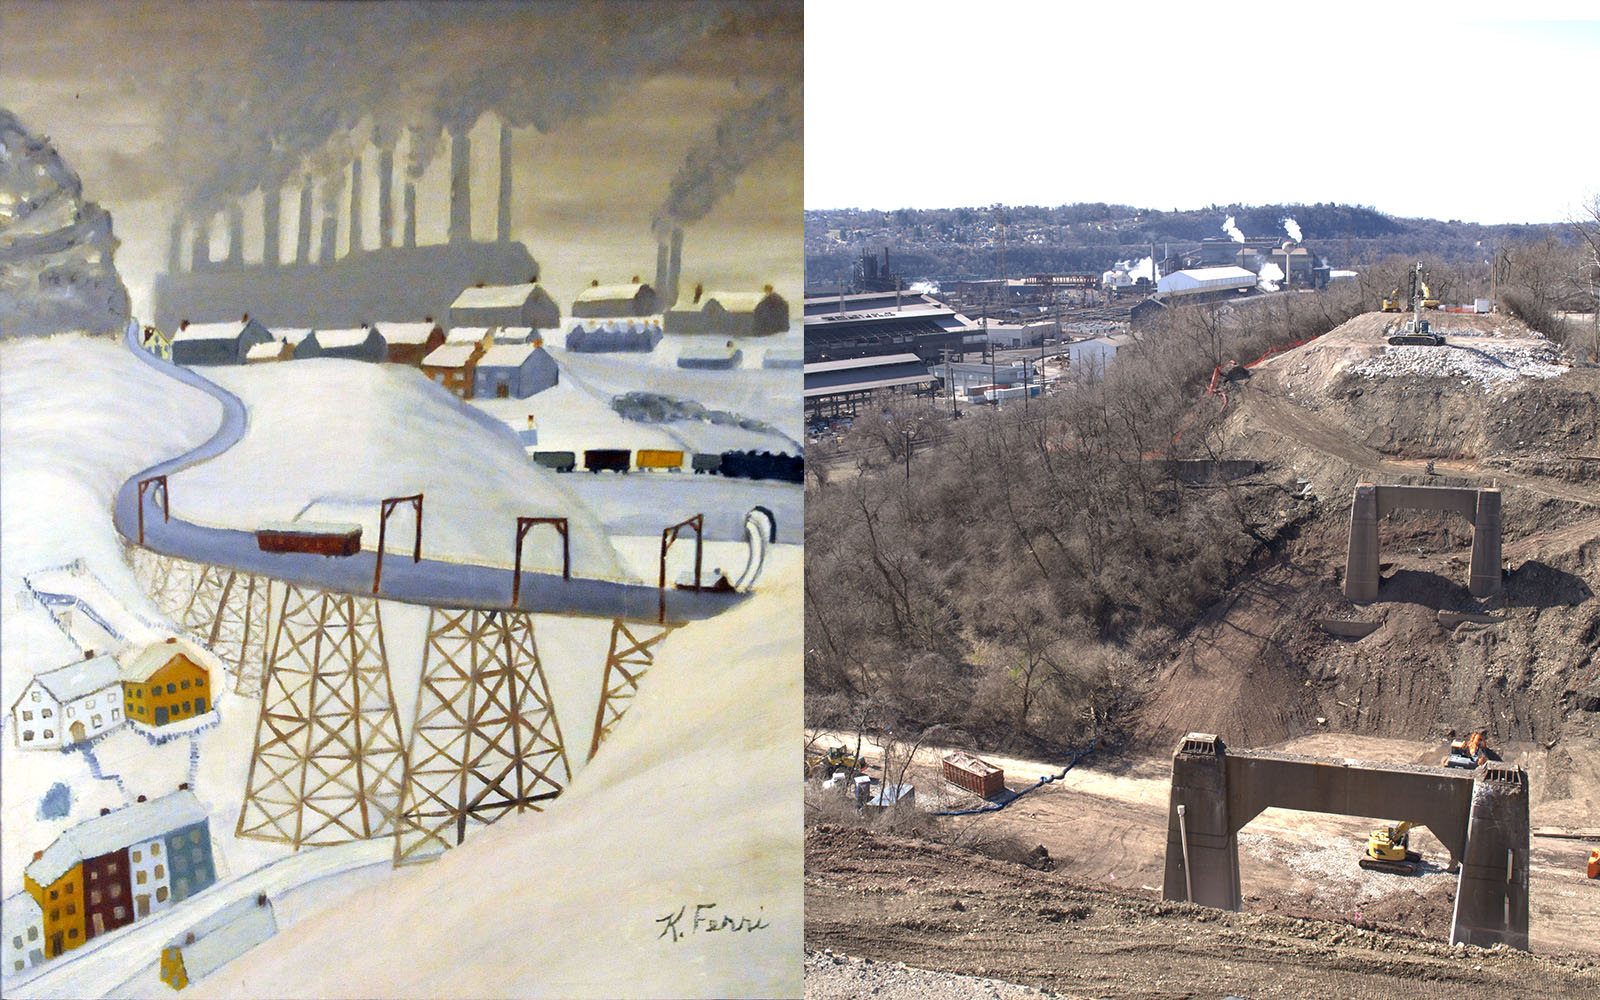 A snowy painting of a old bridge with industry in the background contrasted with a modern photo of the scene.